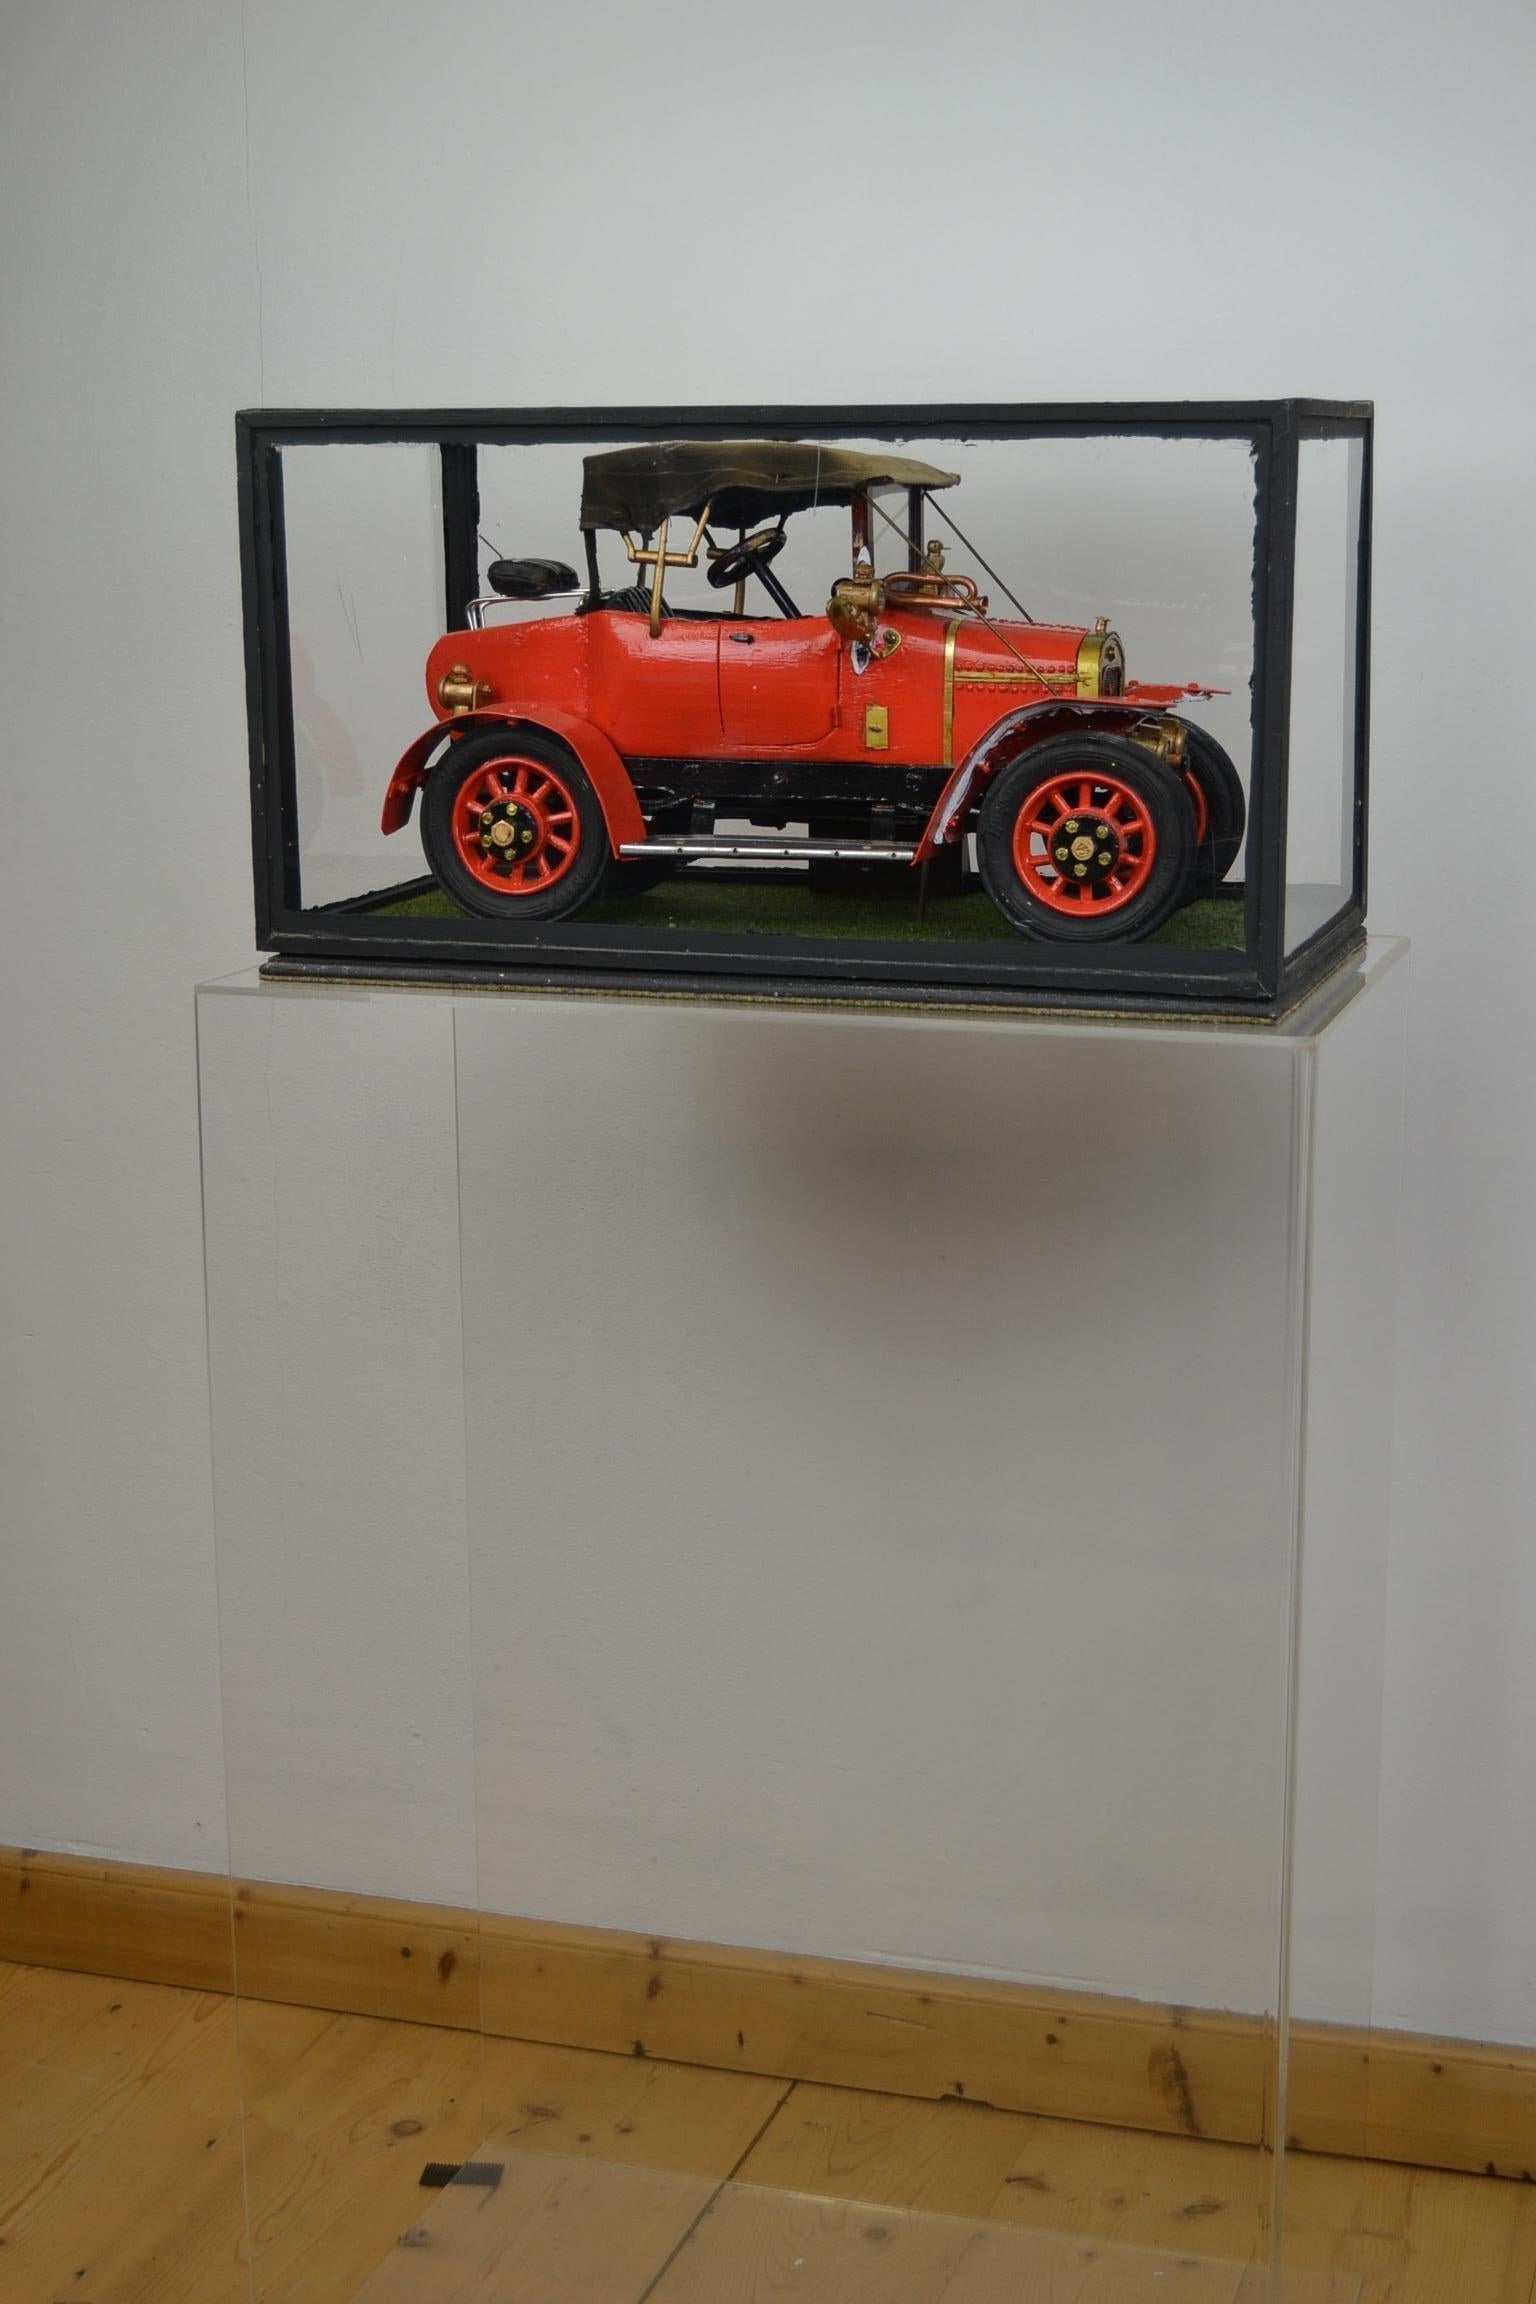 Large Hillman 8.9 Hp 1913 Model Car of Dr. H. Crippen, Handcrafted, 1960s 1